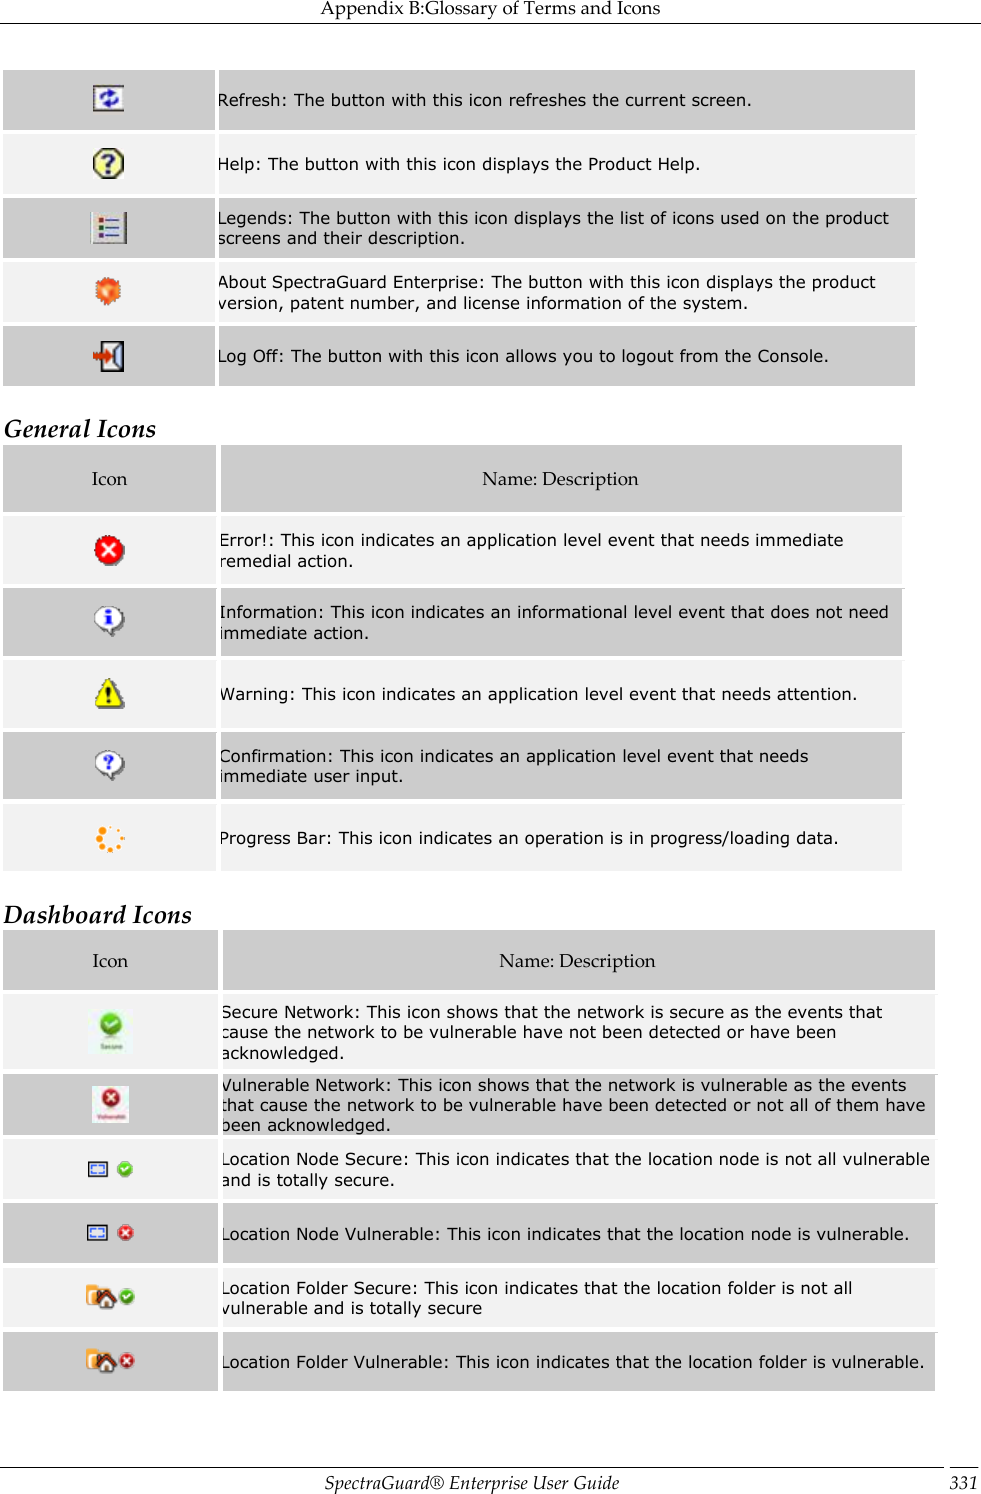 Appendix B:Glossary of Terms and Icons SpectraGuard®  Enterprise User Guide 331  Refresh: The button with this icon refreshes the current screen.  Help: The button with this icon displays the Product Help.  Legends: The button with this icon displays the list of icons used on the product screens and their description.  About SpectraGuard Enterprise: The button with this icon displays the product version, patent number, and license information of the system.  Log Off: The button with this icon allows you to logout from the Console.   General Icons Icon Name: Description  Error!: This icon indicates an application level event that needs immediate remedial action.  Information: This icon indicates an informational level event that does not need immediate action.  Warning: This icon indicates an application level event that needs attention.  Confirmation: This icon indicates an application level event that needs immediate user input.  Progress Bar: This icon indicates an operation is in progress/loading data.   Dashboard Icons Icon Name: Description  Secure Network: This icon shows that the network is secure as the events that cause the network to be vulnerable have not been detected or have been acknowledged.  Vulnerable Network: This icon shows that the network is vulnerable as the events that cause the network to be vulnerable have been detected or not all of them have been acknowledged.  Location Node Secure: This icon indicates that the location node is not all vulnerable and is totally secure.  Location Node Vulnerable: This icon indicates that the location node is vulnerable.  Location Folder Secure: This icon indicates that the location folder is not all vulnerable and is totally secure  Location Folder Vulnerable: This icon indicates that the location folder is vulnerable. 